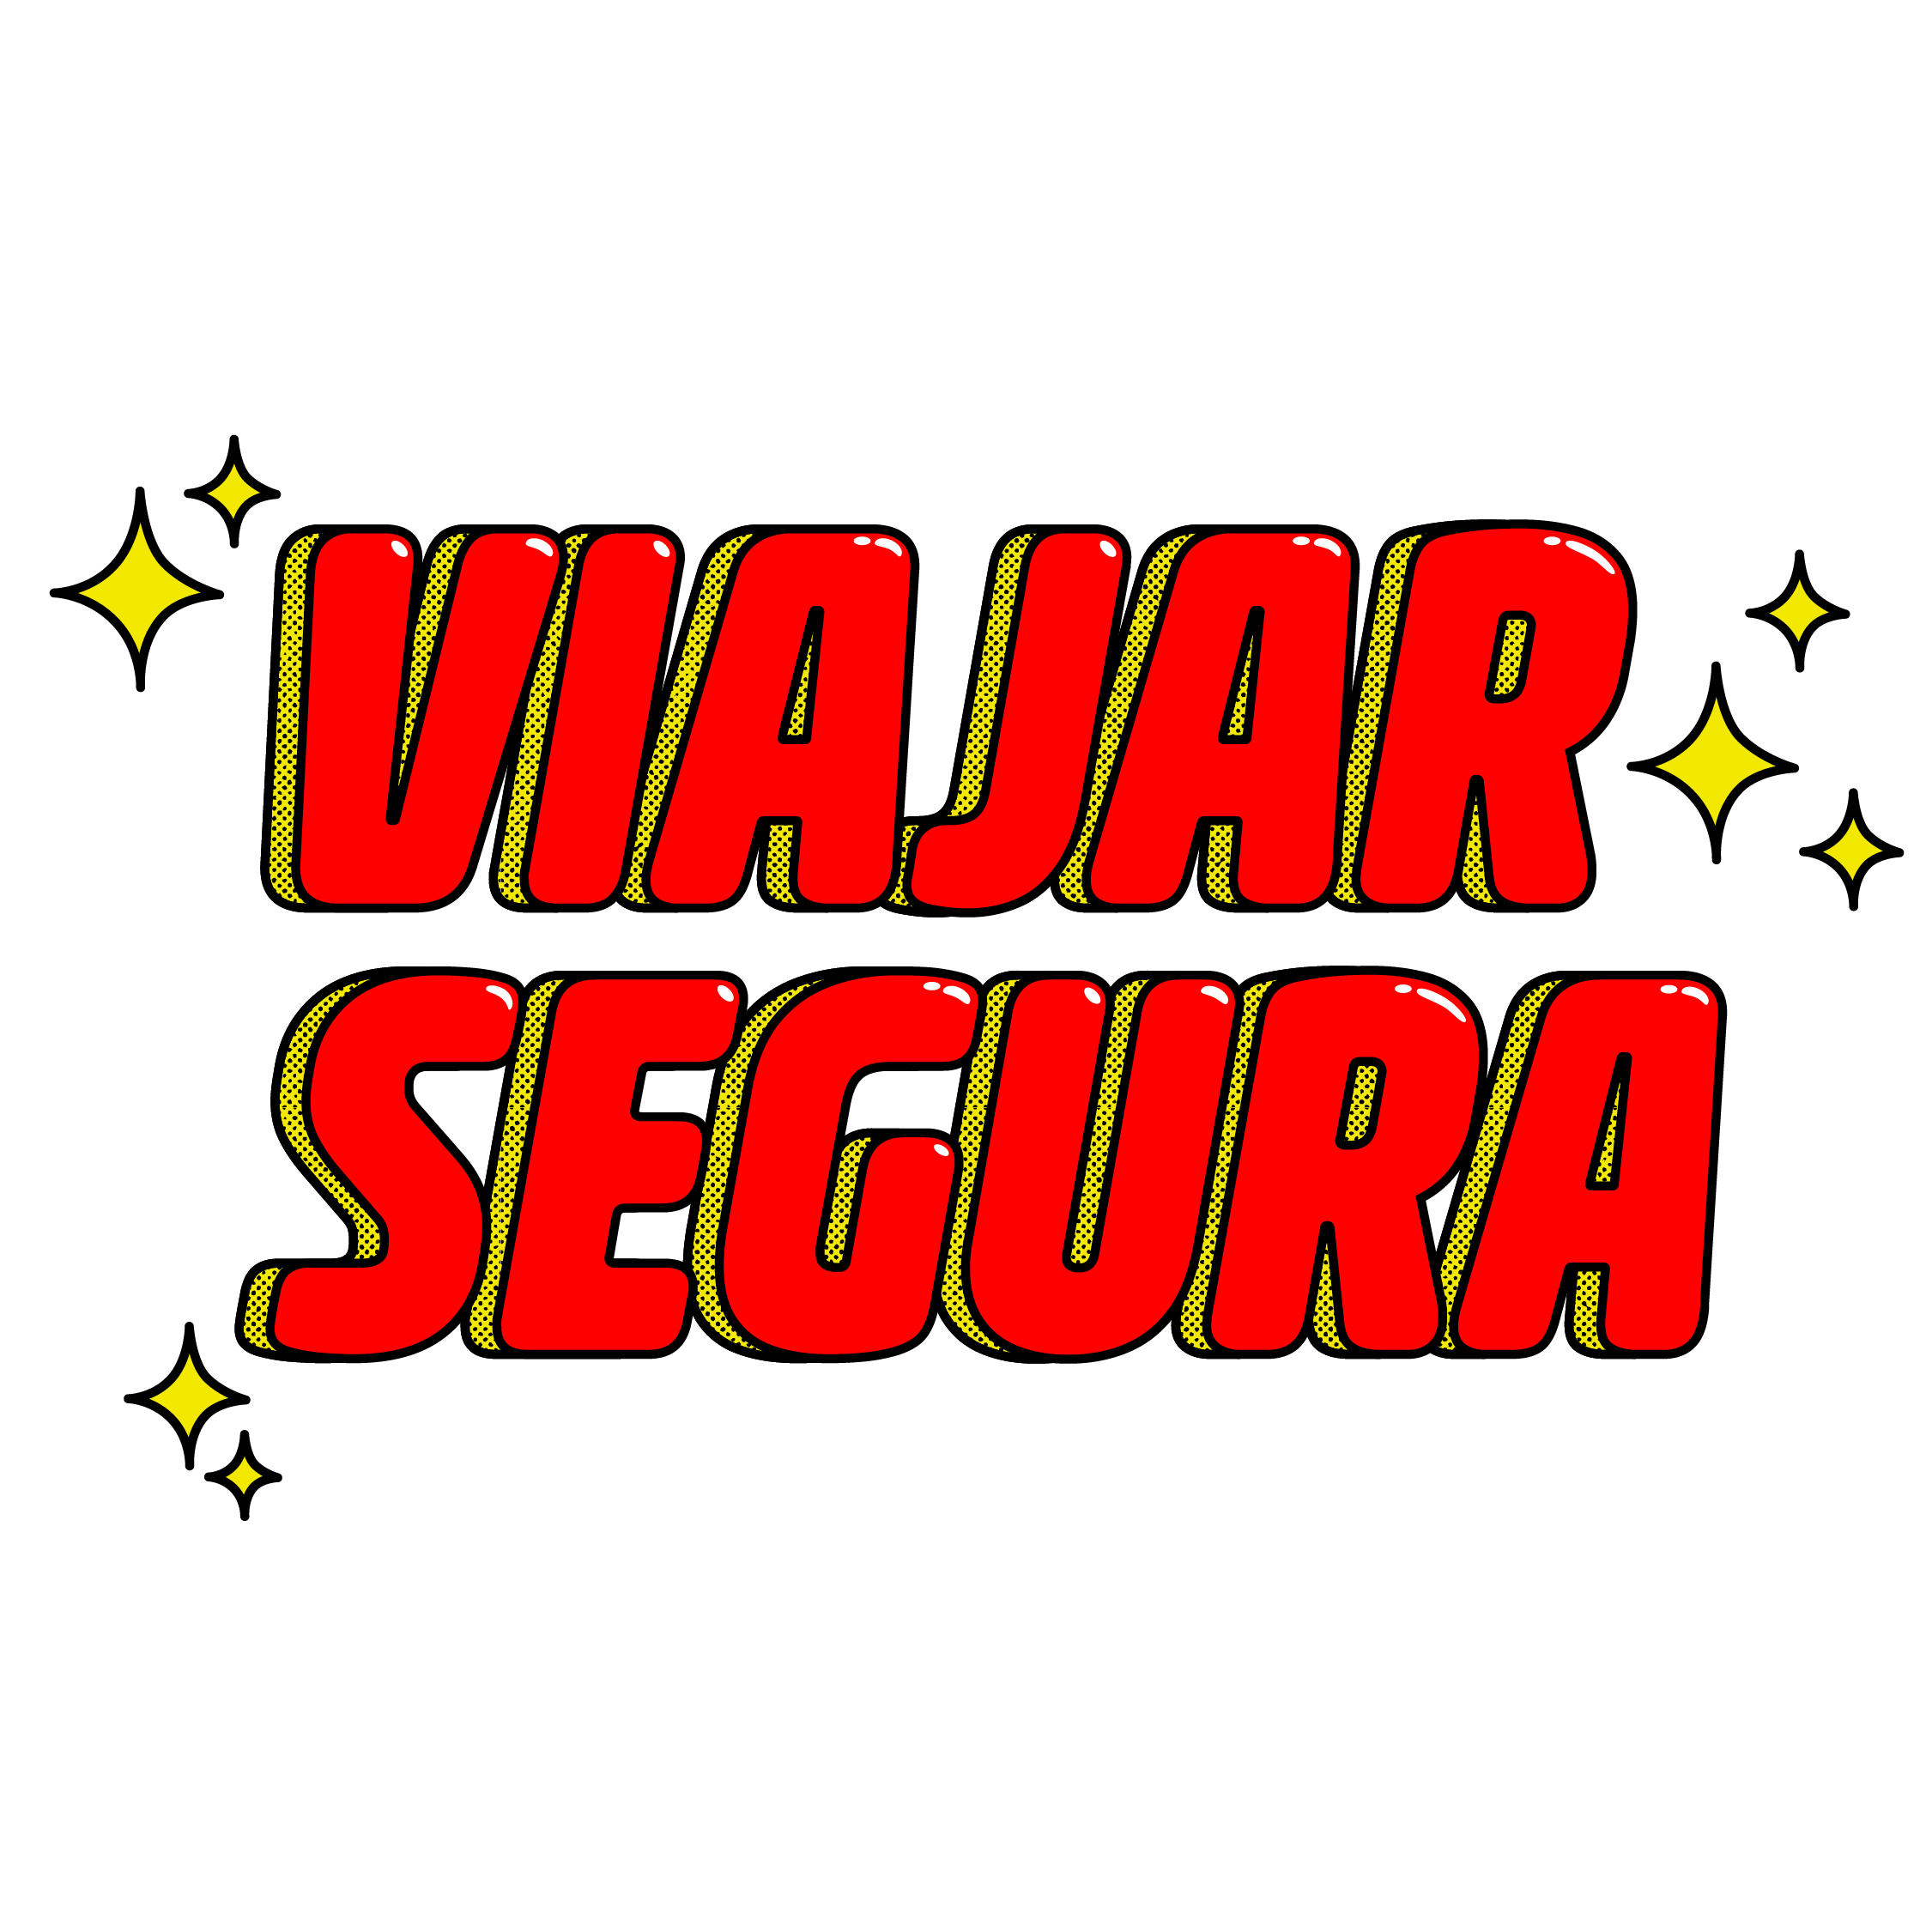 Illustrated lettering of the phrase "Viajar Segura" in red font with yellow stars.